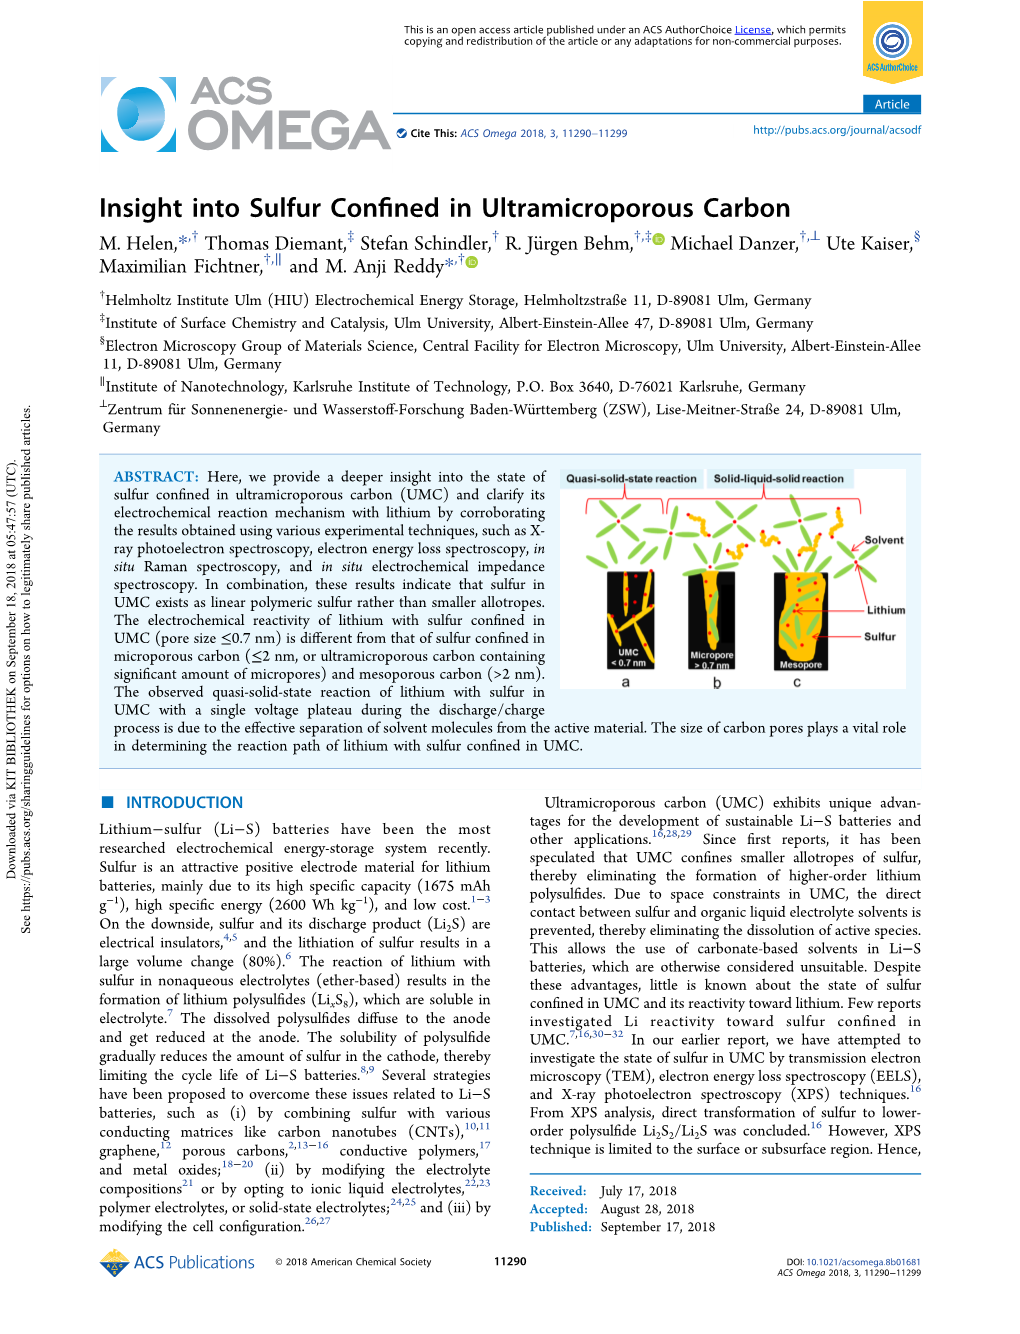 Insight Into Sulfur Confined in Ultramicroporous Carbon